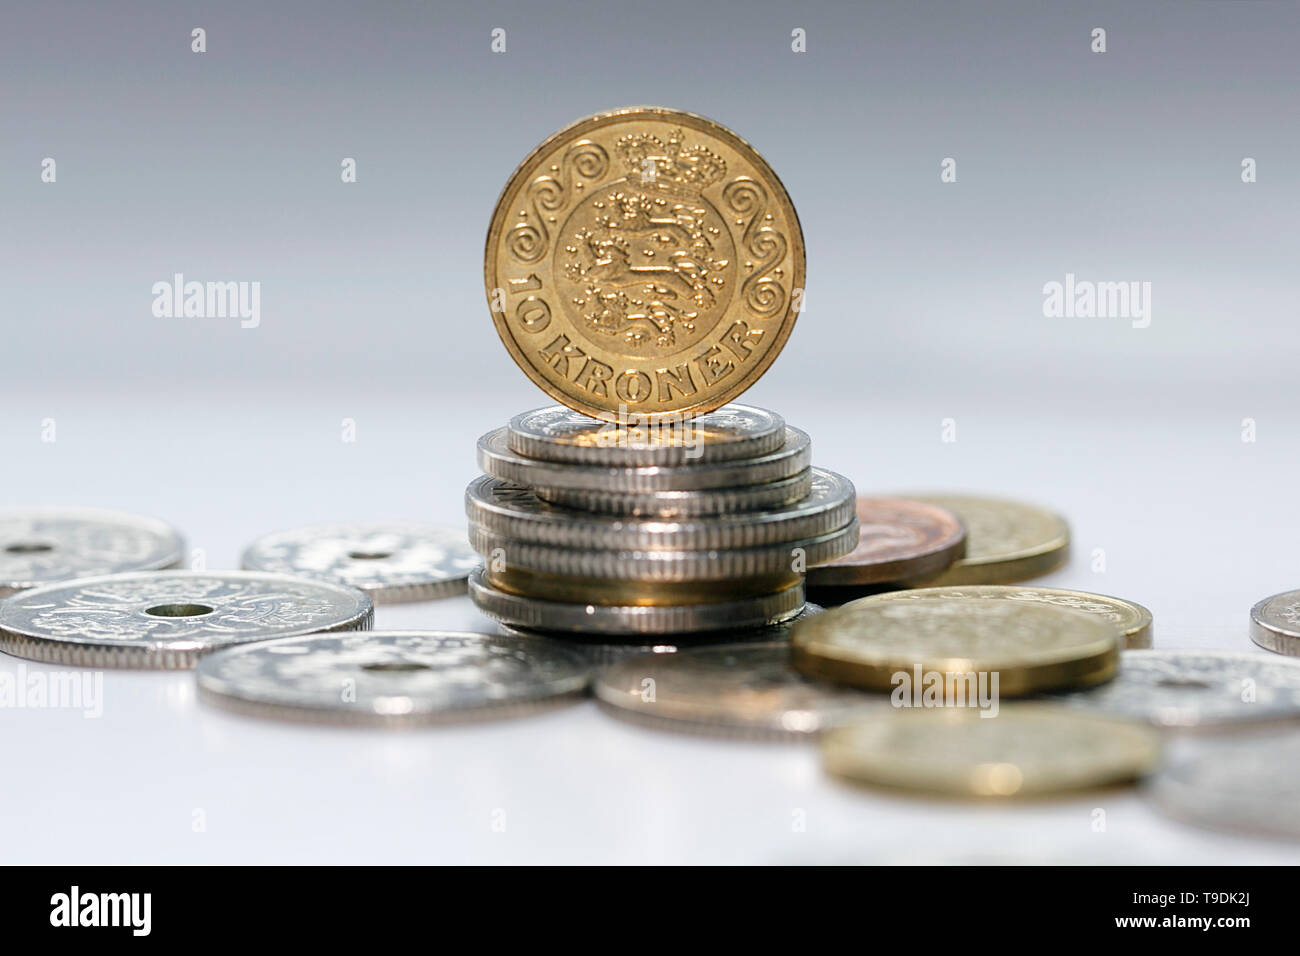 Danish Coin High Resolution Stock Photography and Images - Alamy